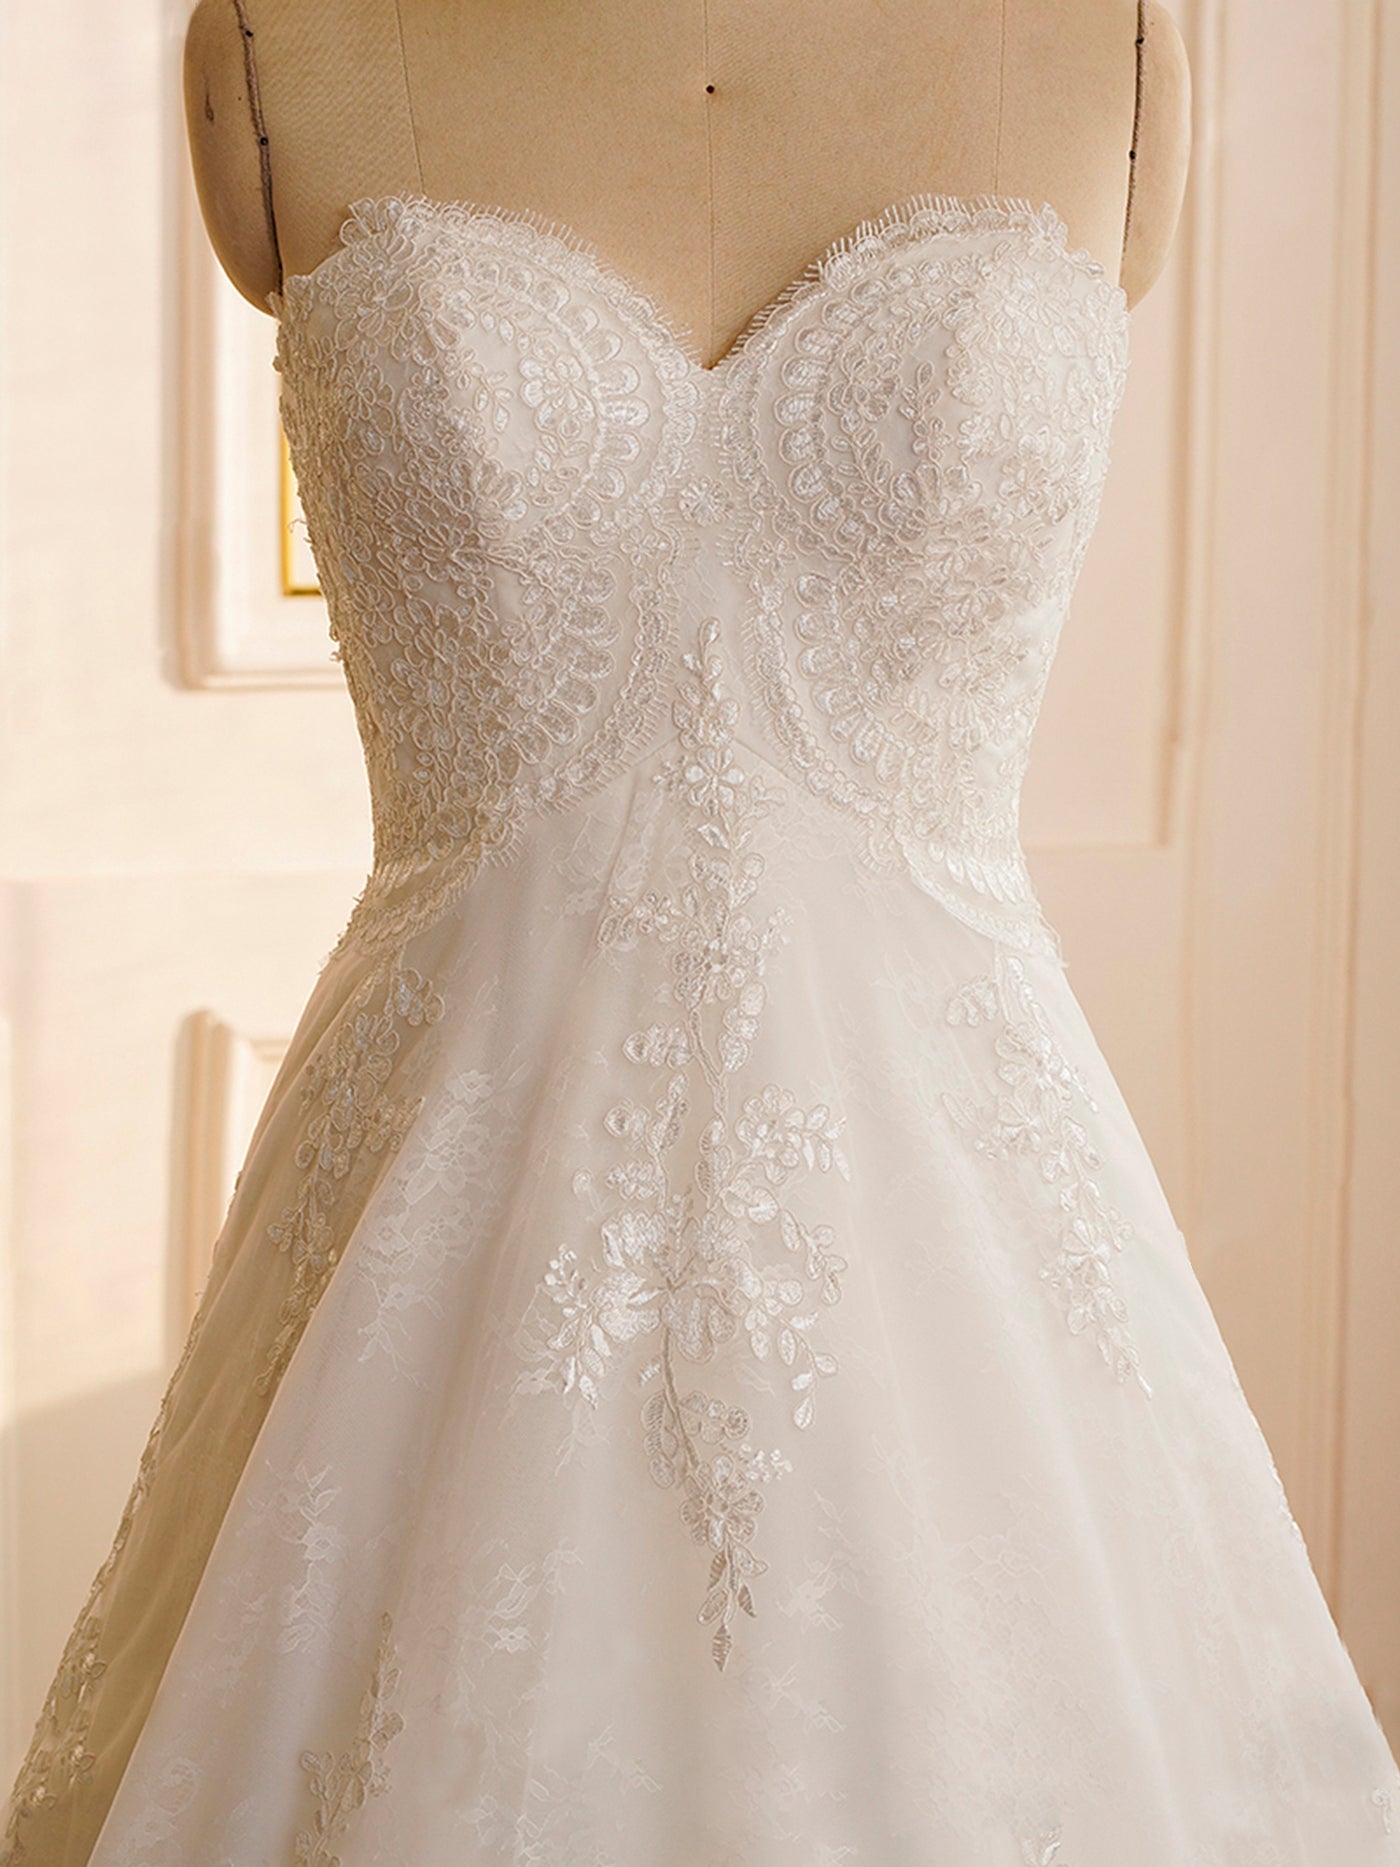 A Bergamot Bridal Strapless Whole Lace Court Train Wedding Dress in a bridal shop in London.